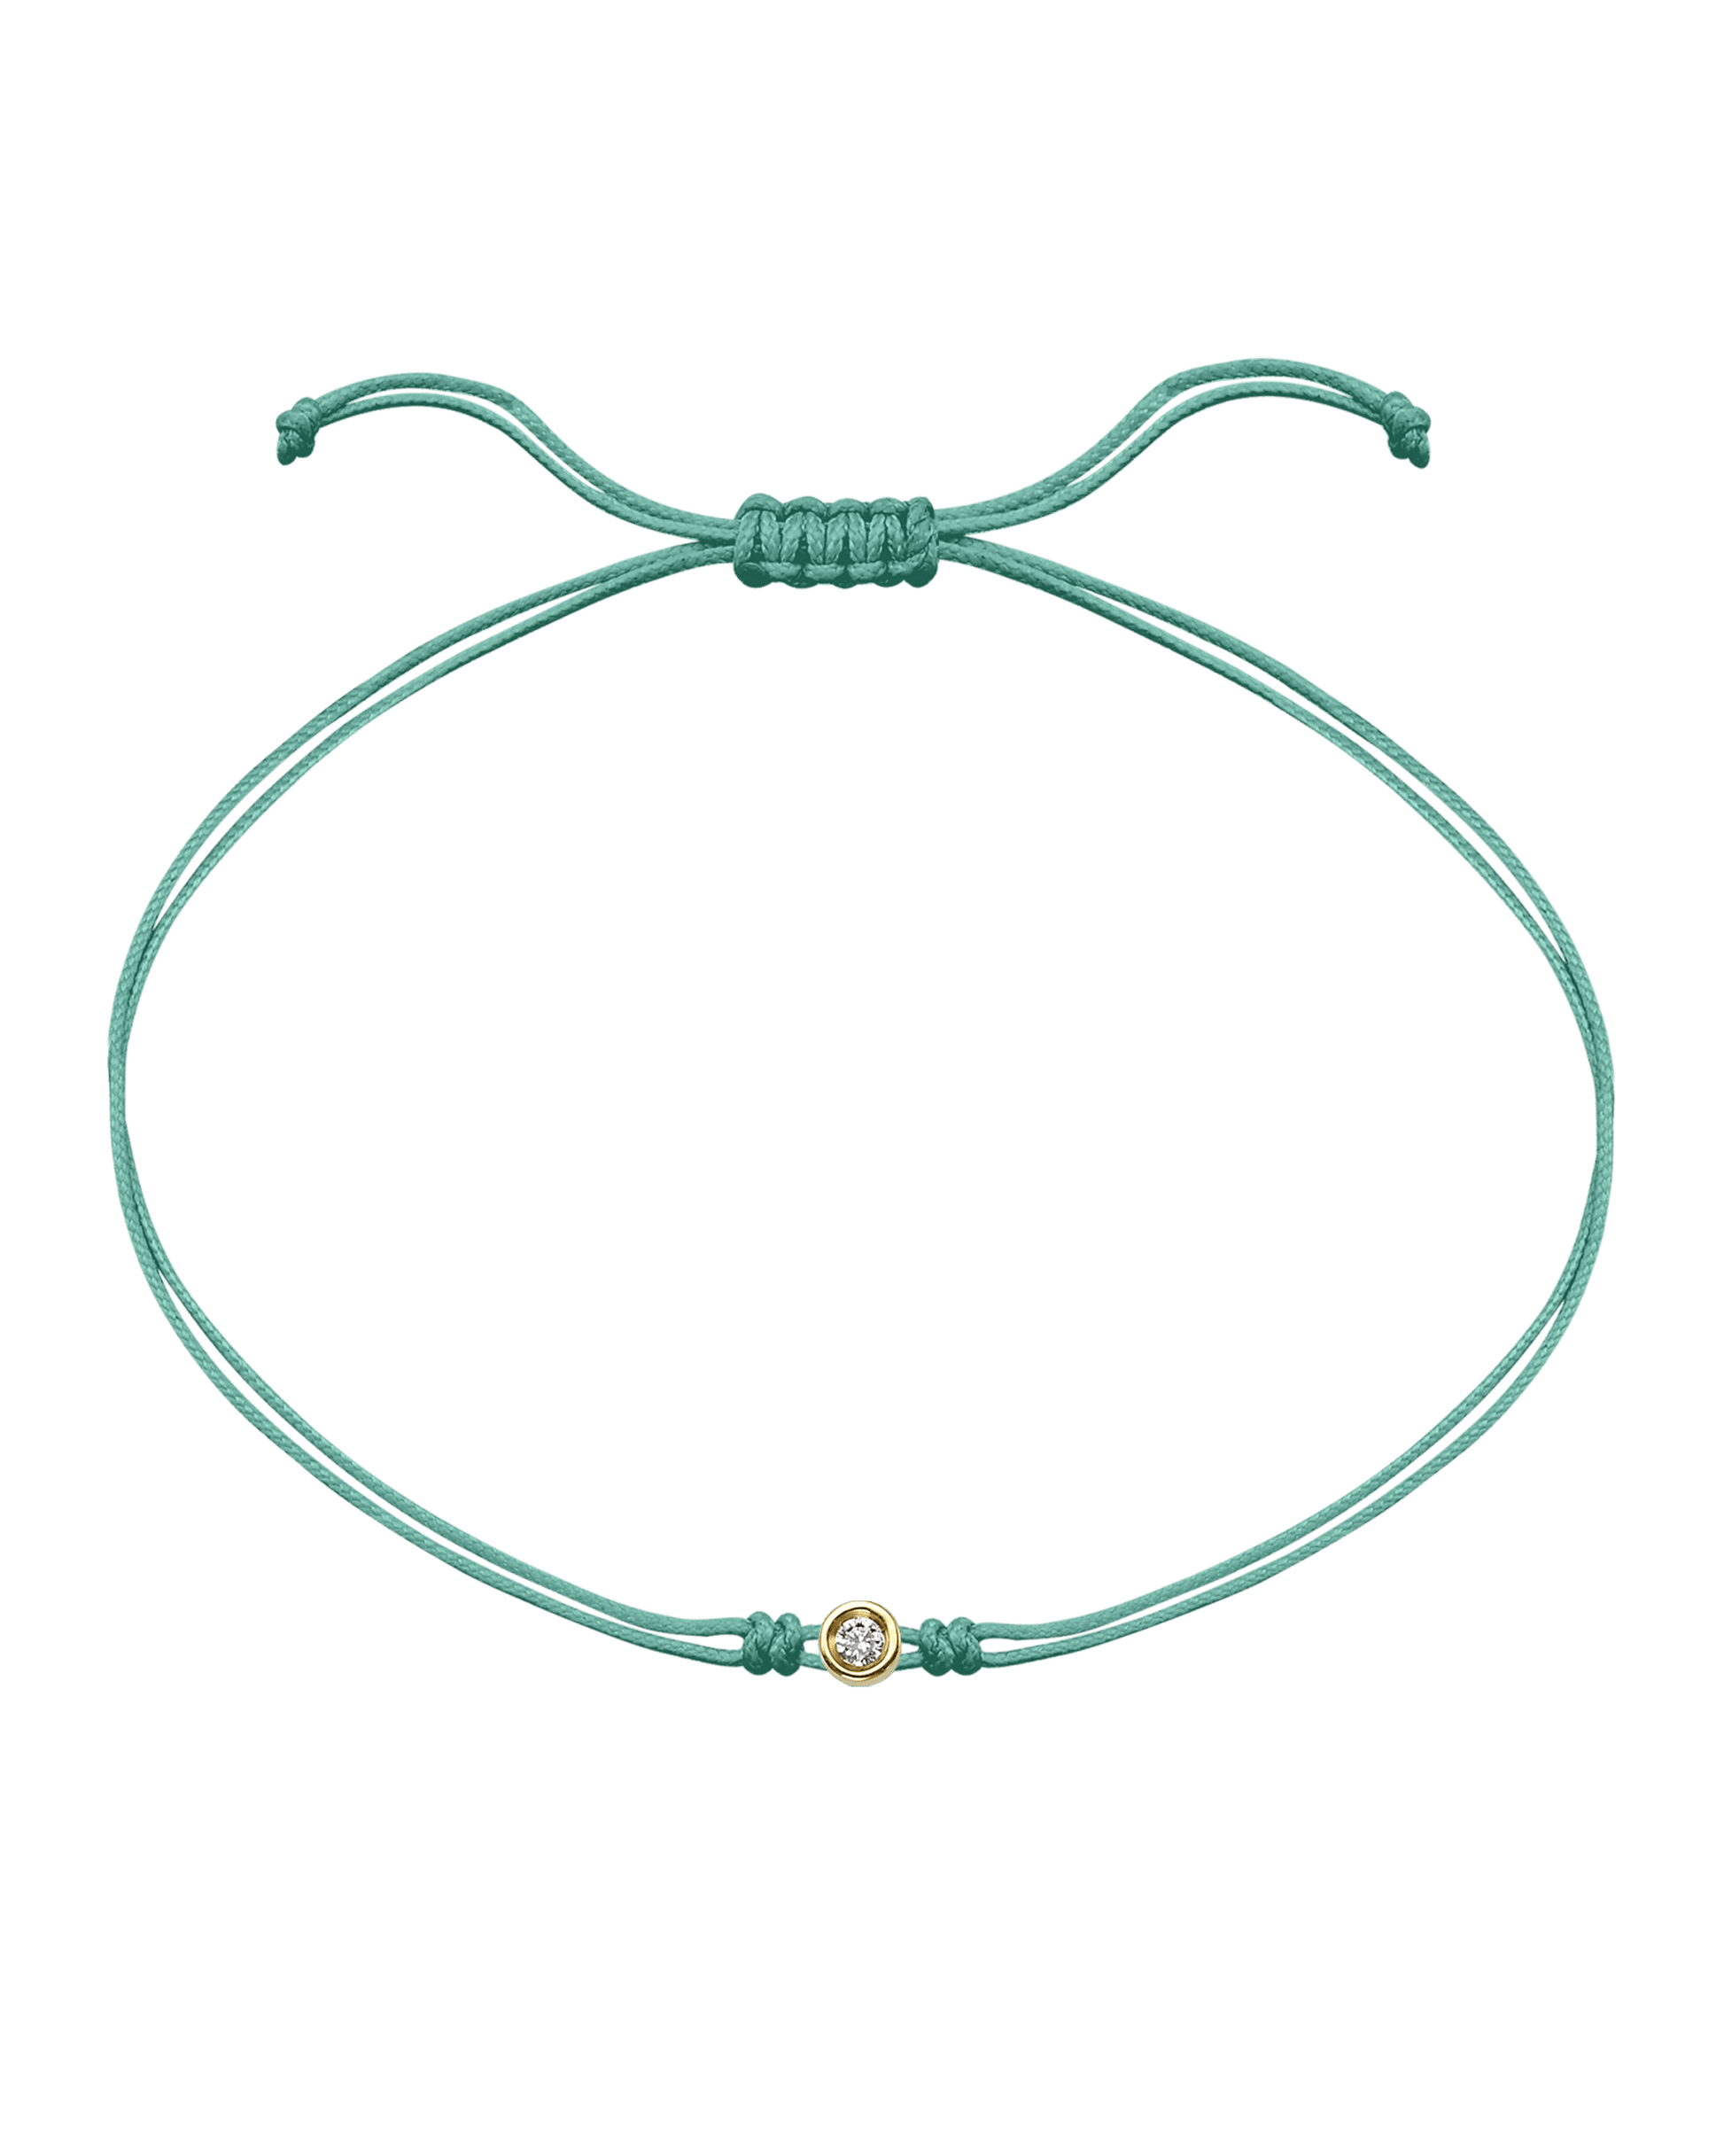 Summer Edition : The Classic String of Love - 14K Yellow Gold Bracelets magal-dev Apple Martini - Light Green Small: 0.03ct 